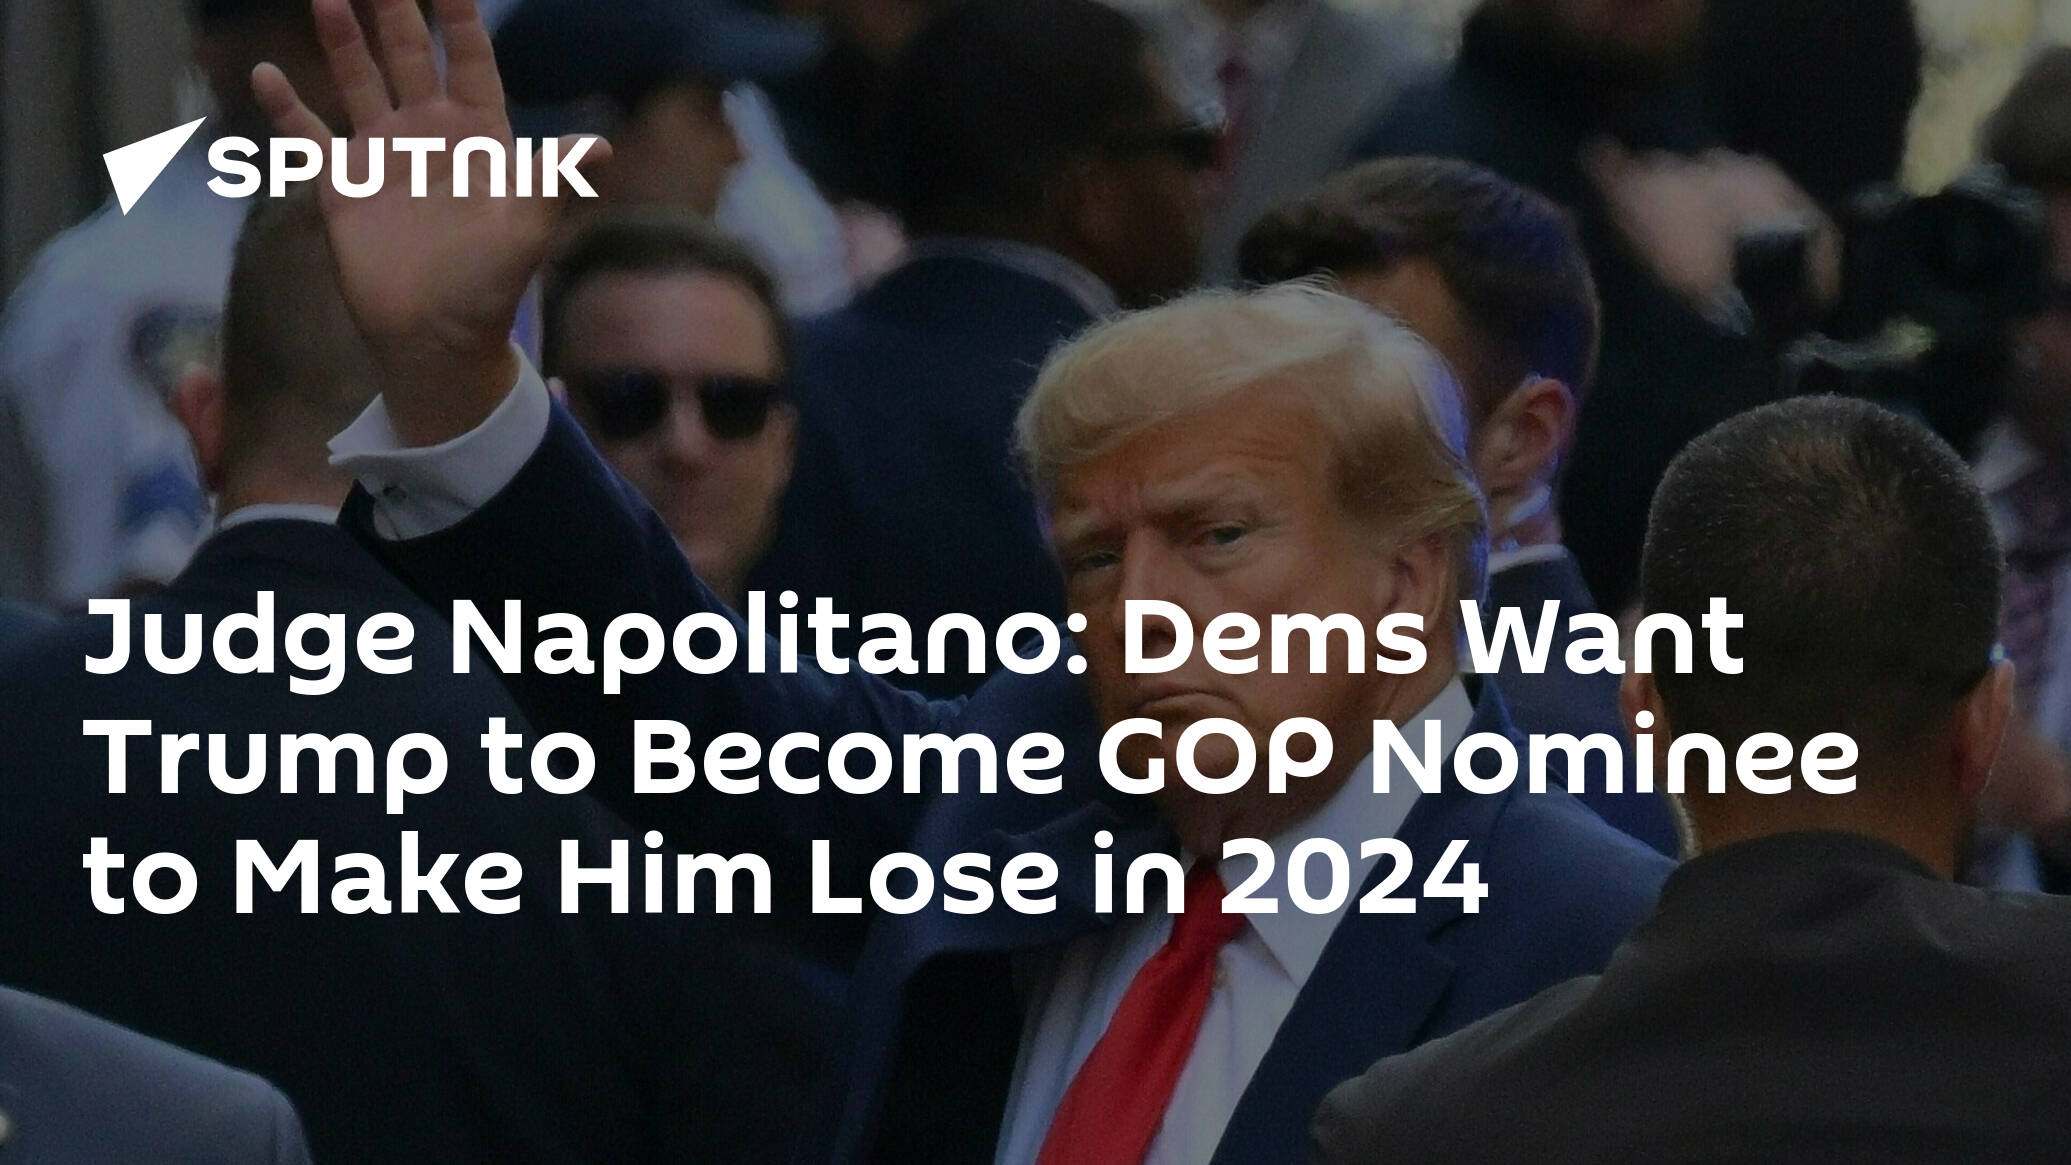 Judge Napolitano: Dems Want Trump to Become GOP Nominee to Make Him Lose in 2024